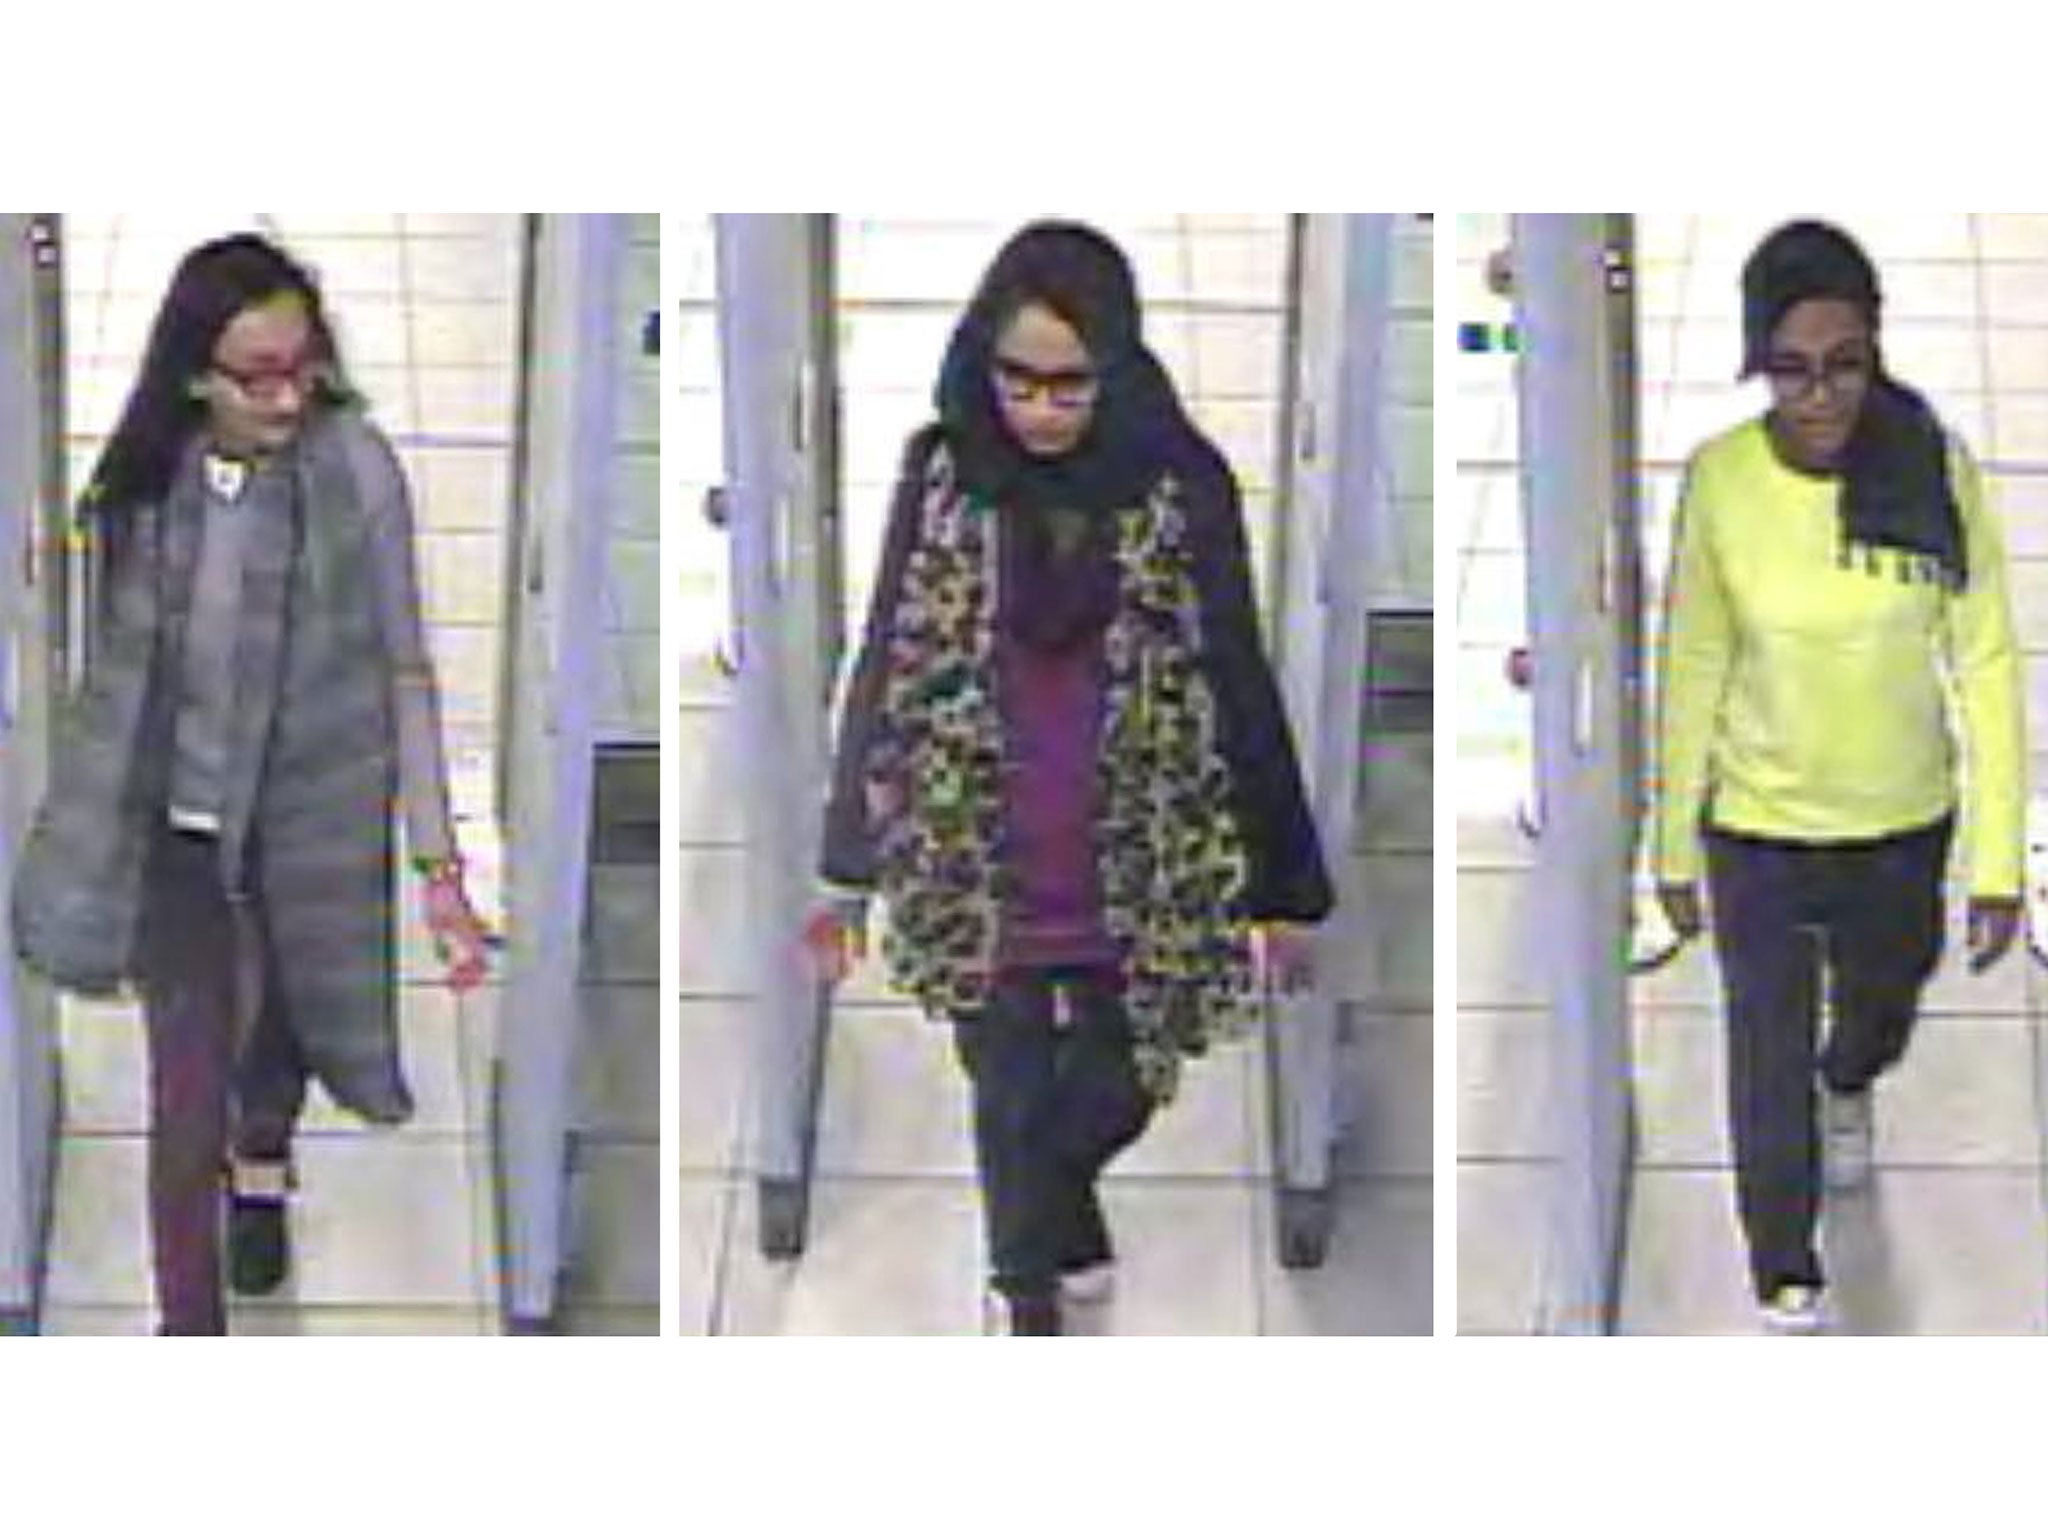 A screen shot of CCTV footage of the three girls at Gatwick airport